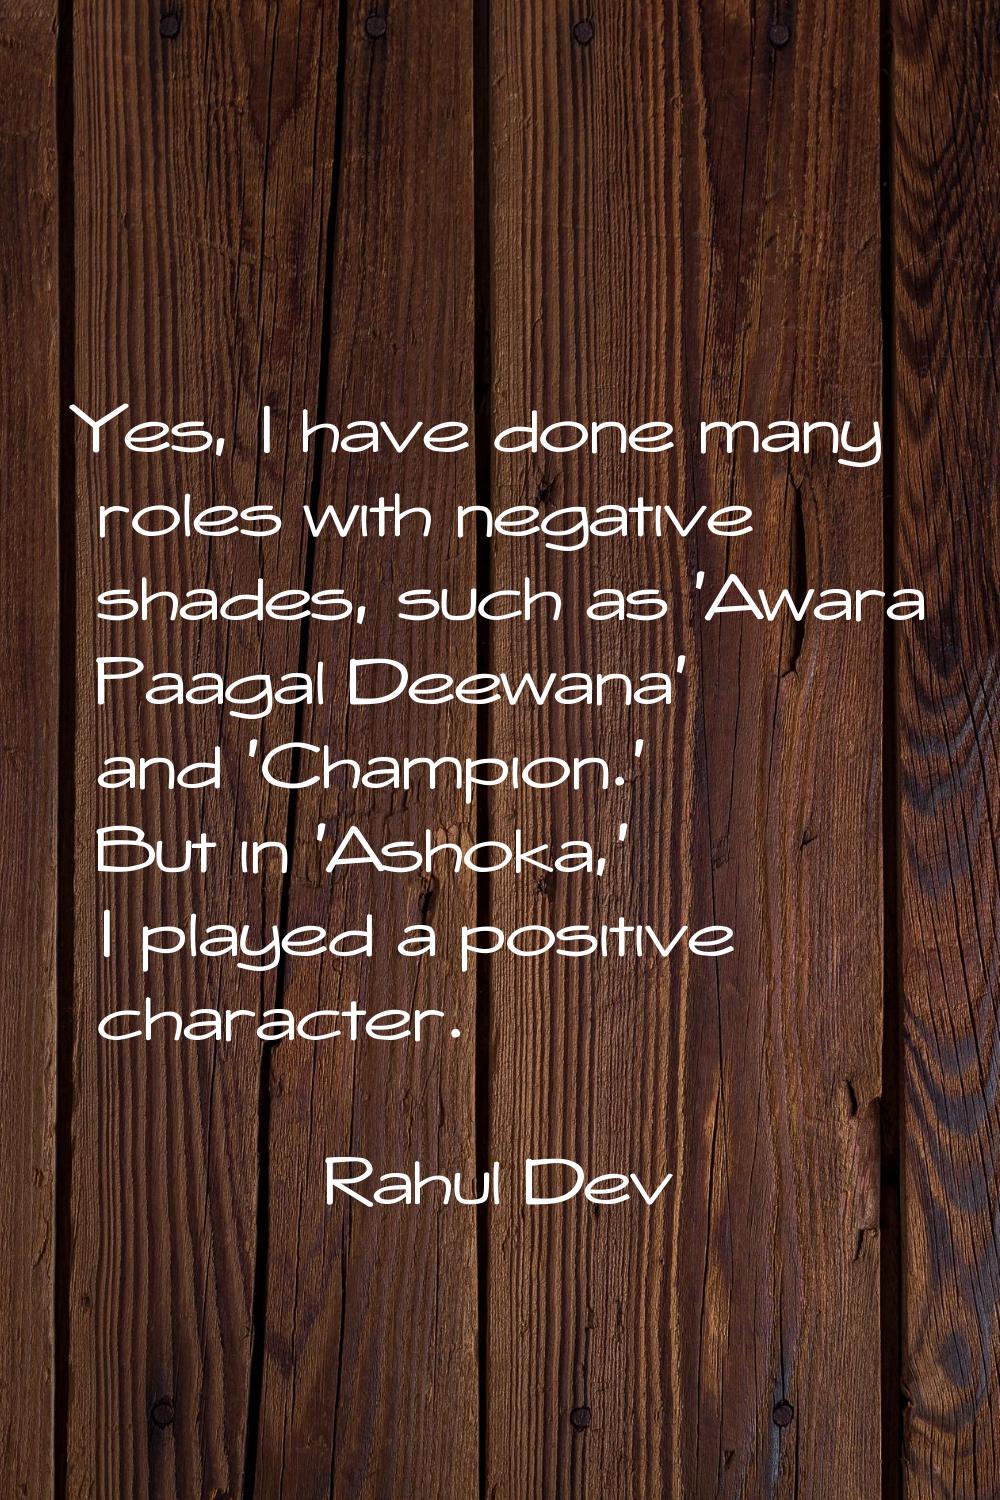 Yes, I have done many roles with negative shades, such as 'Awara Paagal Deewana' and 'Champion.' Bu